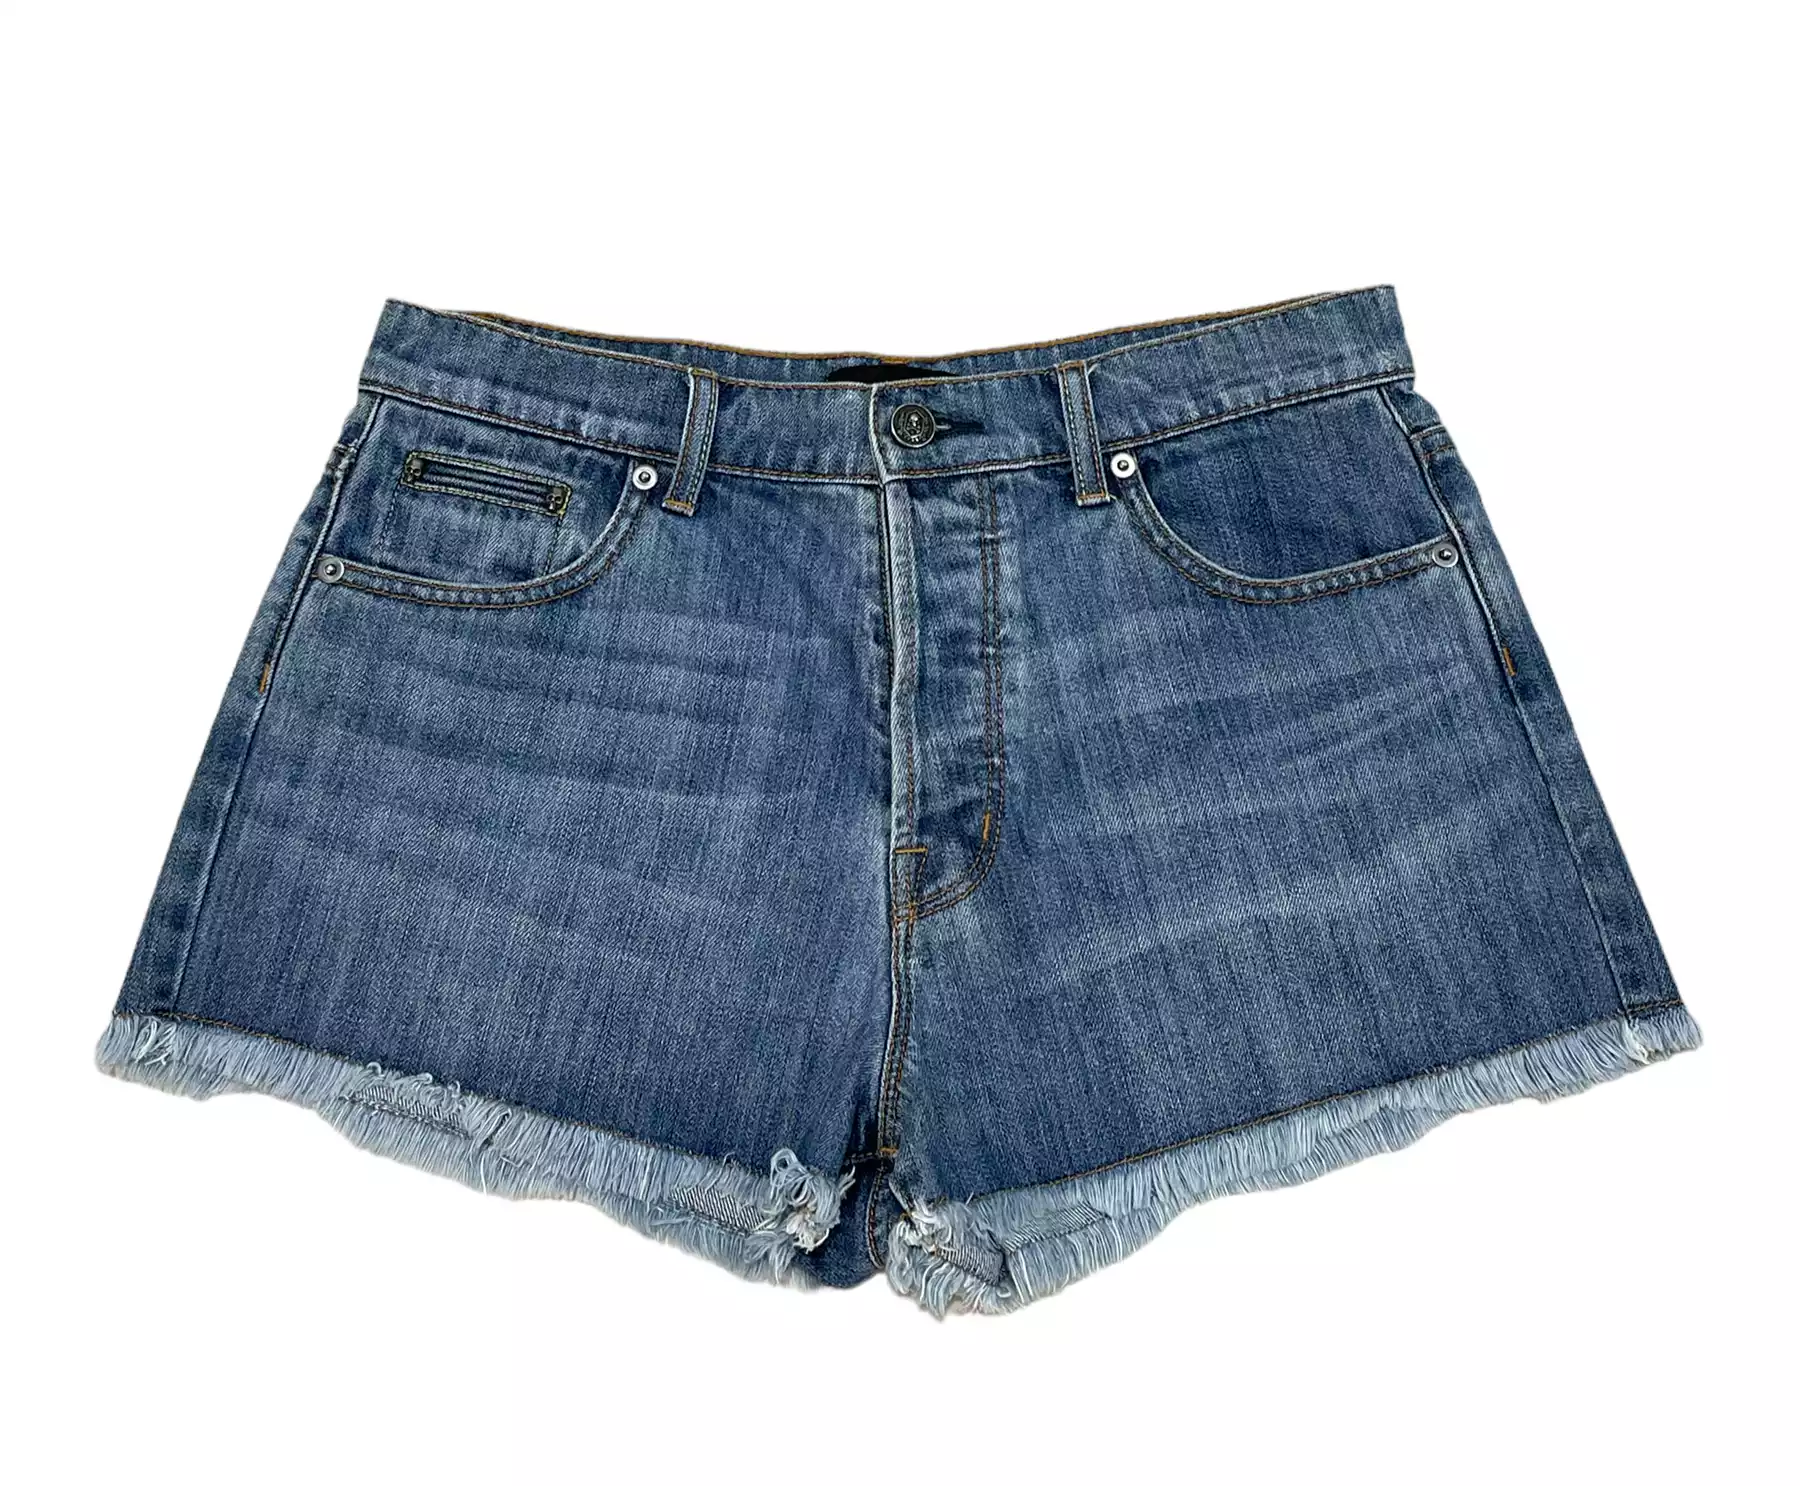 Denim Shorts by The Kooples